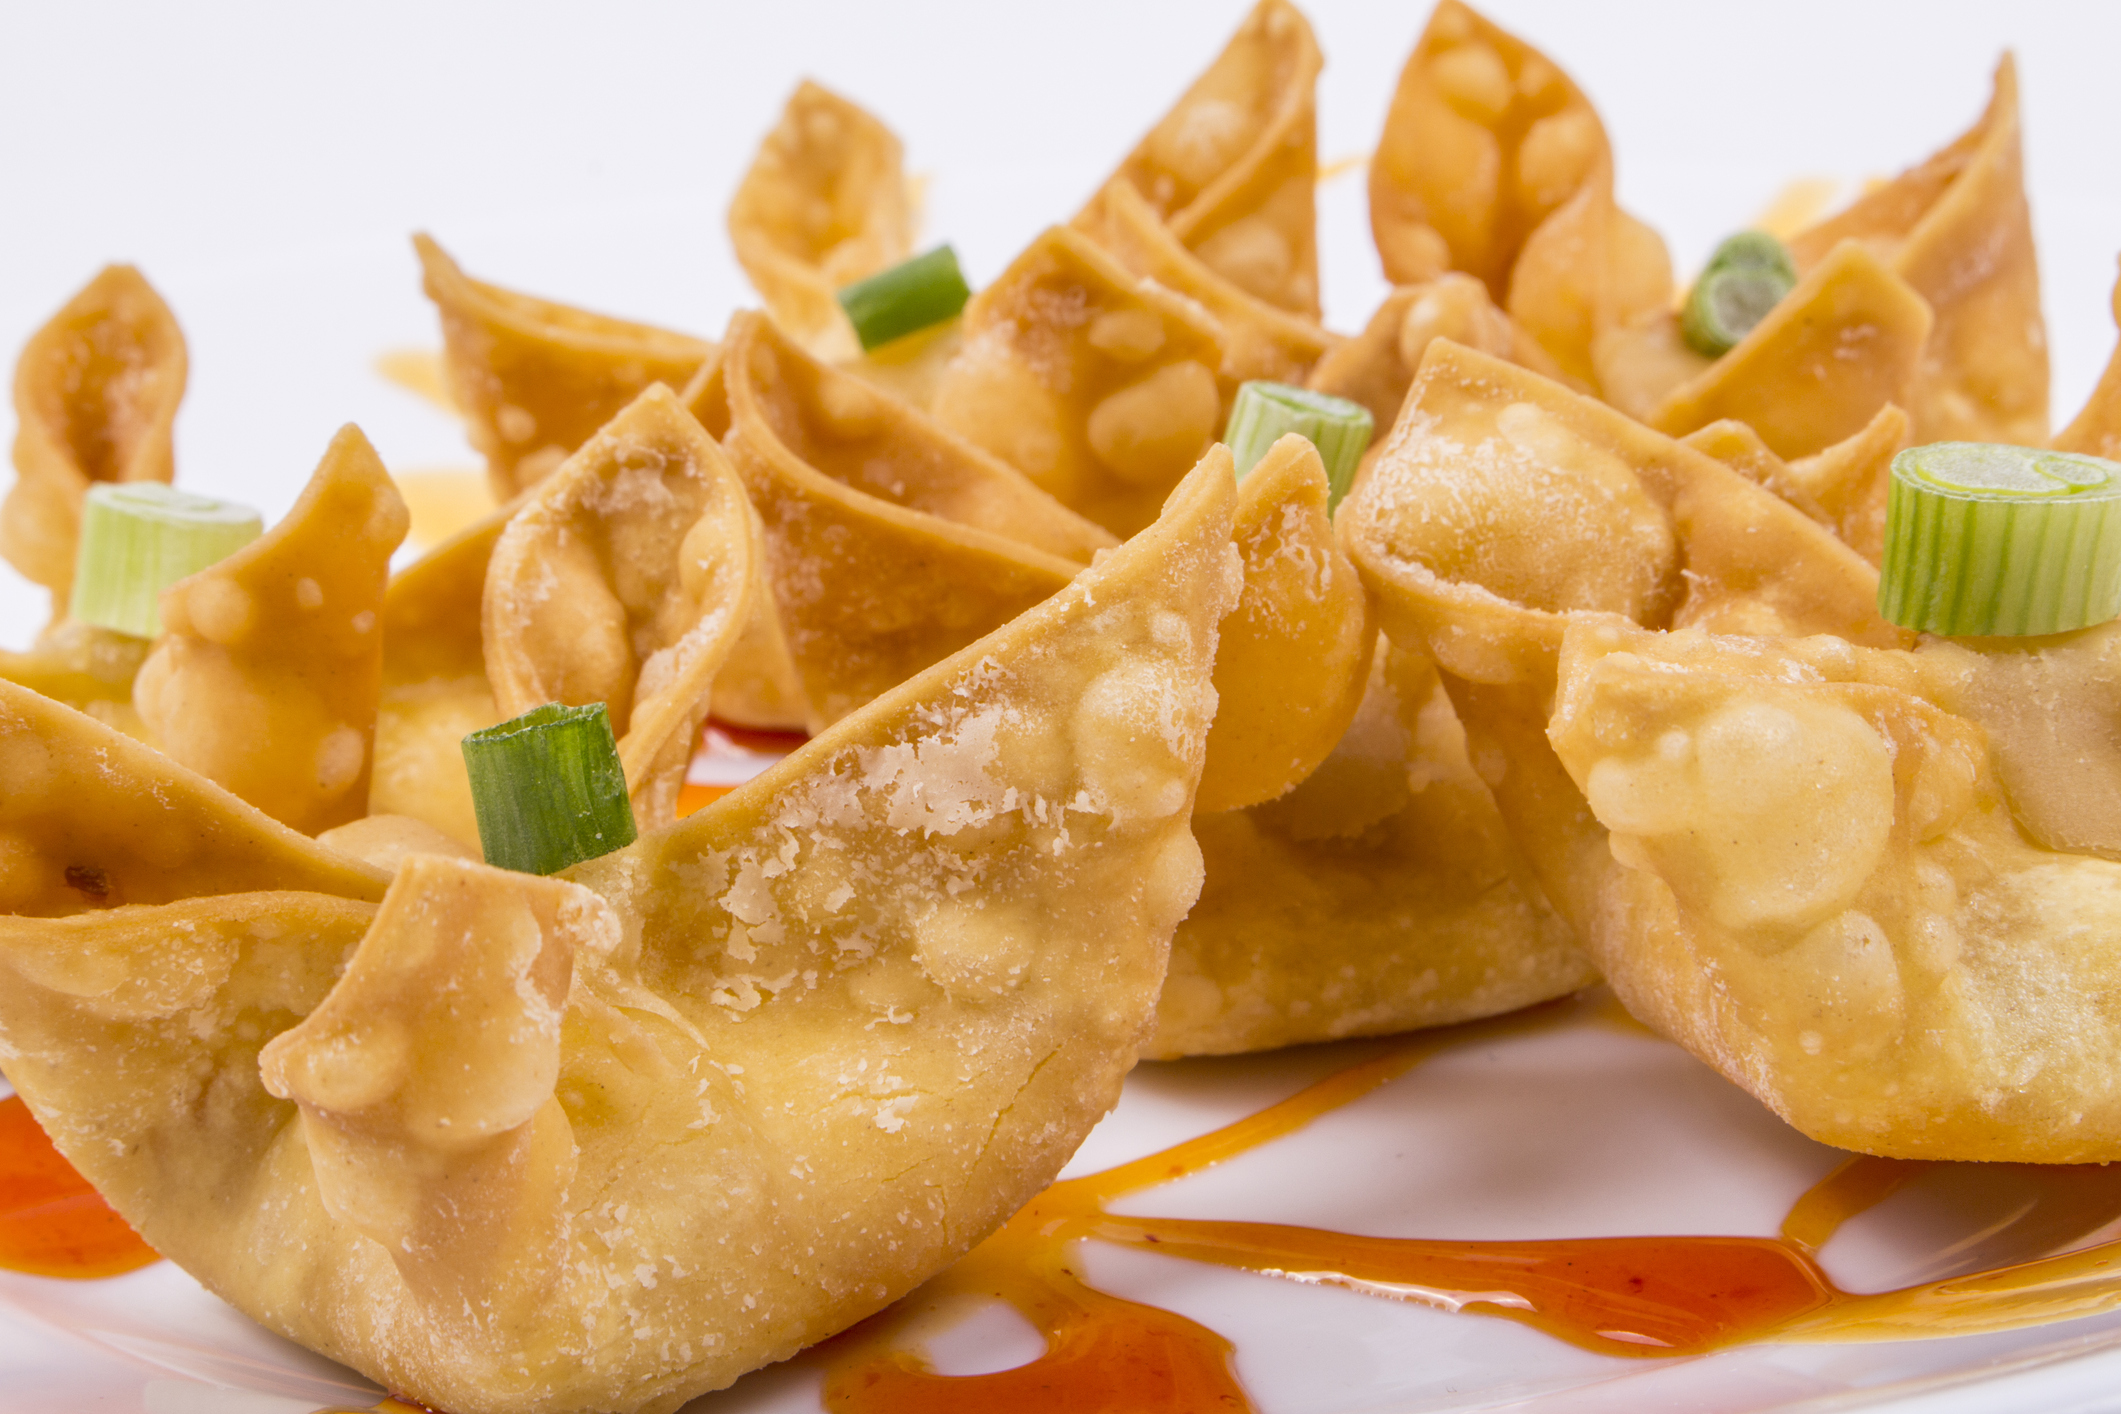 Air Fryer Crab Wontons with Scallions on Top